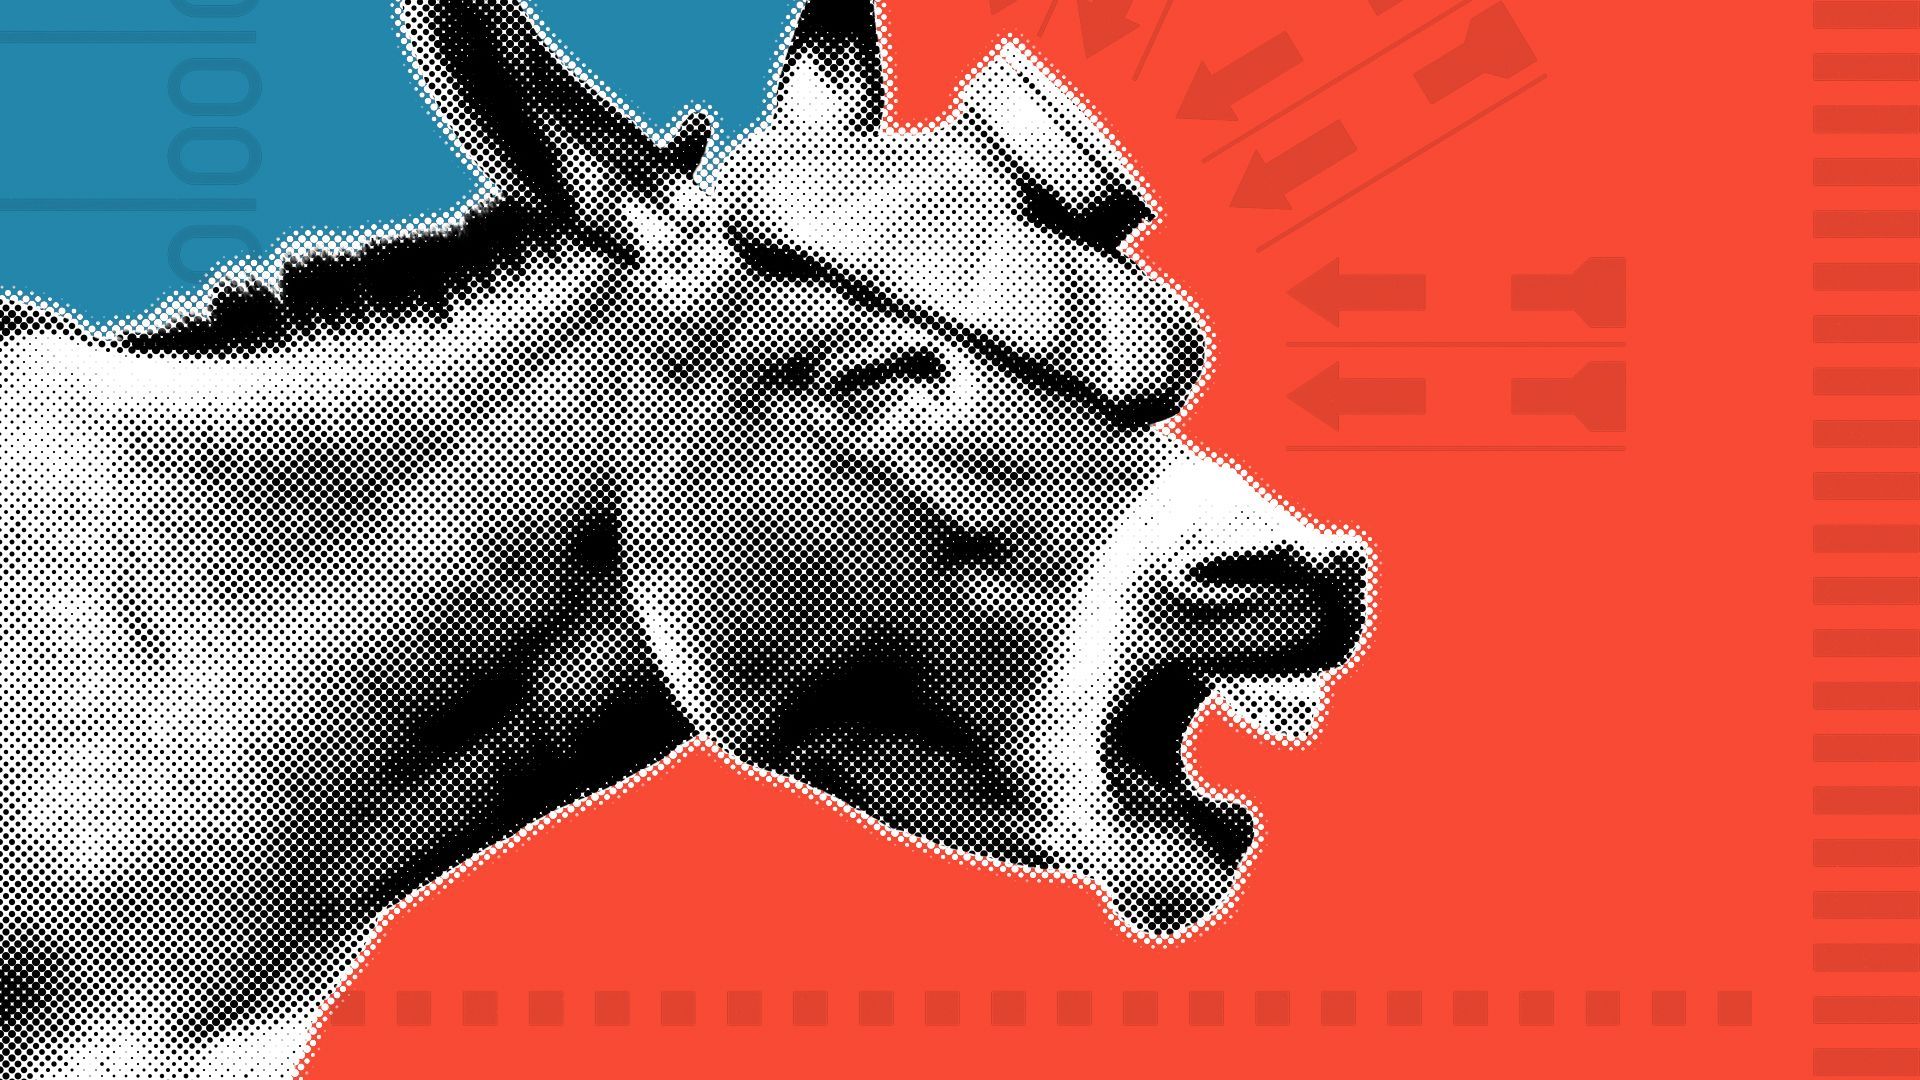 Illustration of a distressed donkey with an ice pack on its head. 